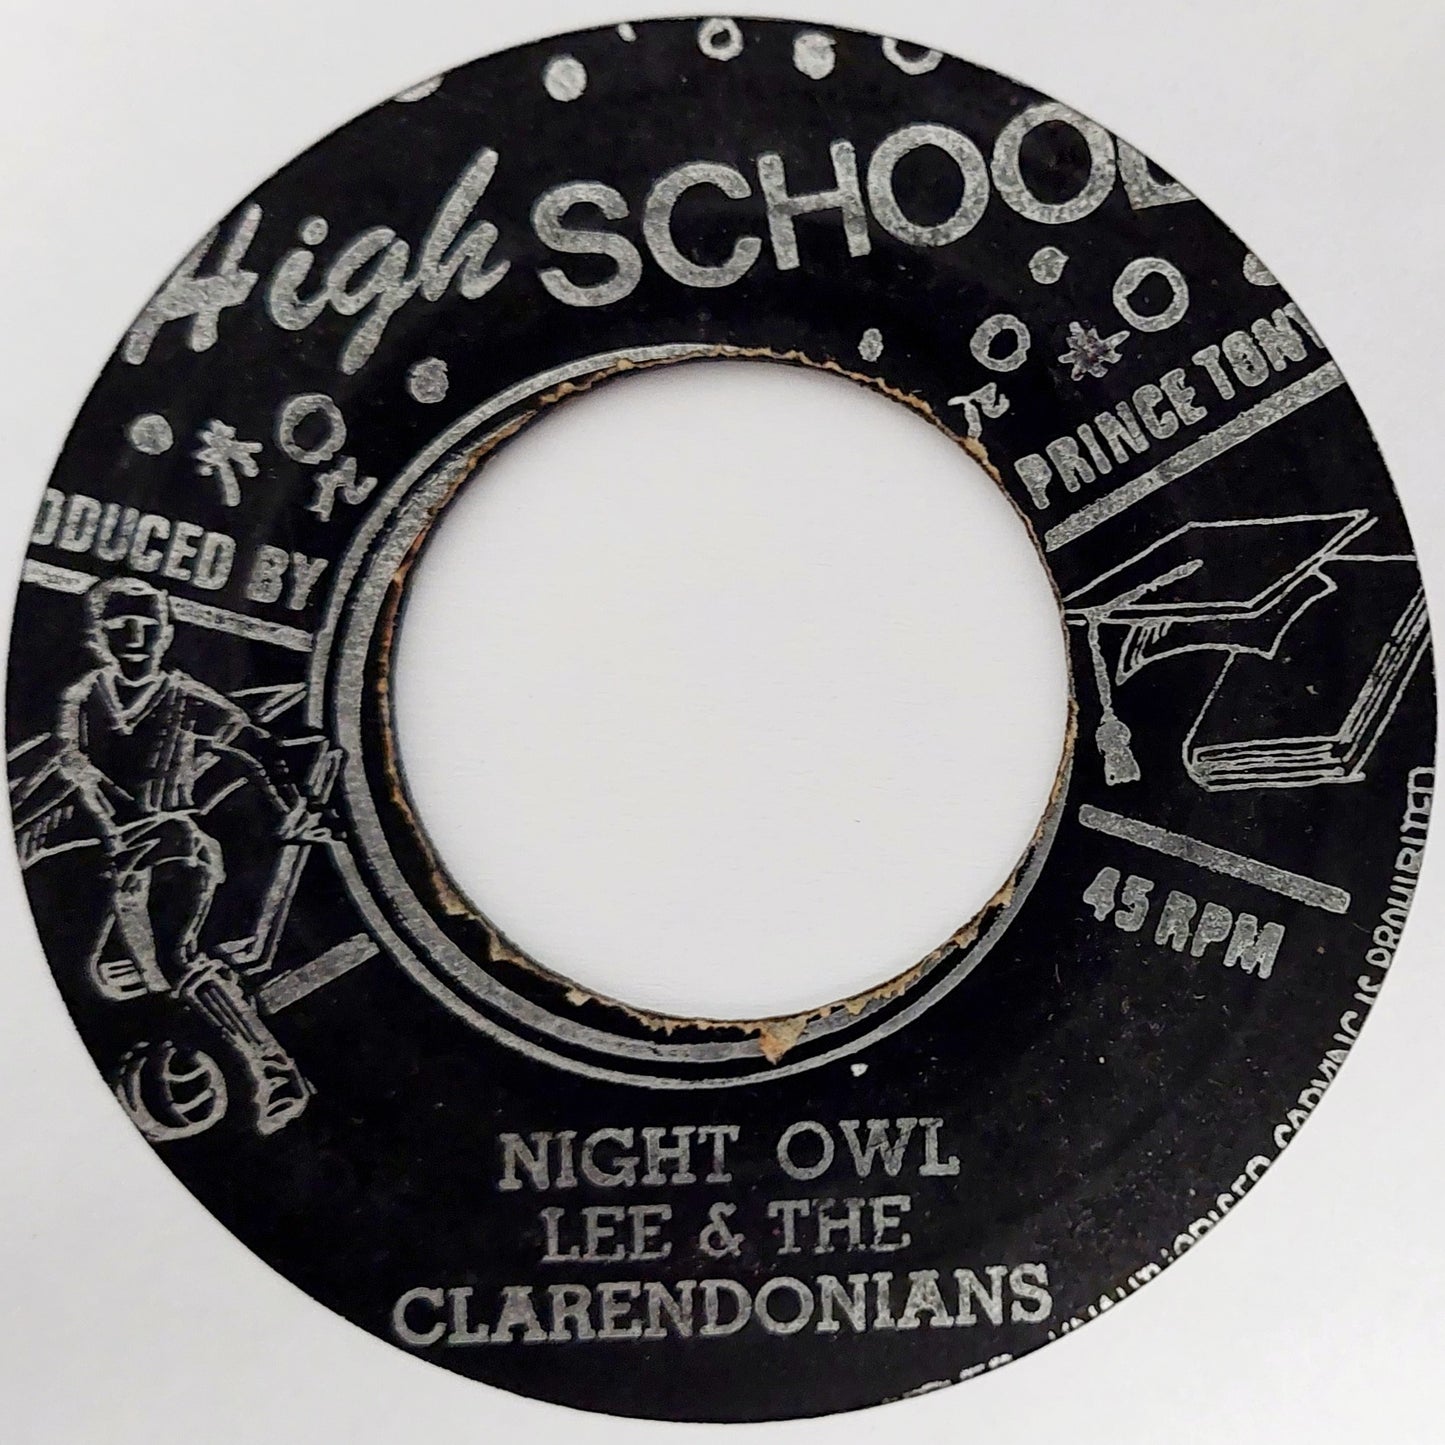 Lee & The Clarendonians - Night Owl